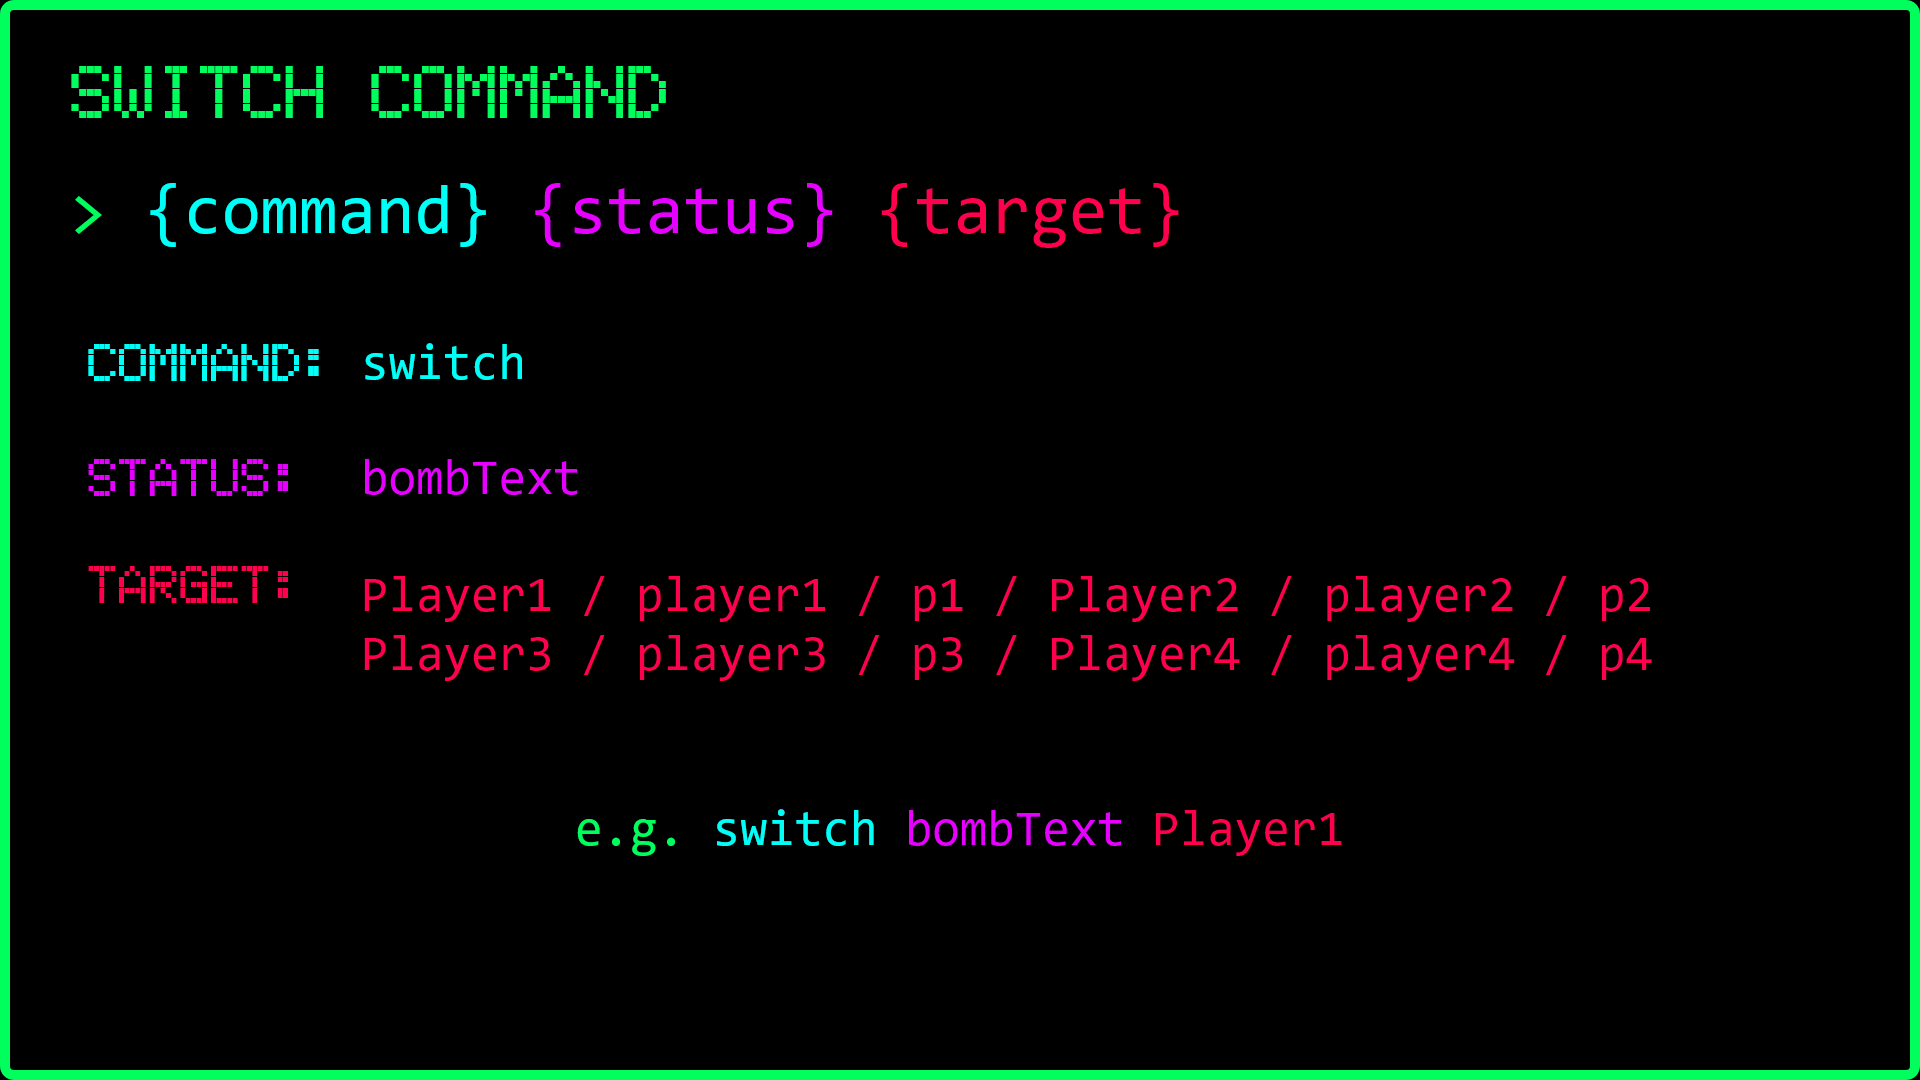 SWITCH COMMAND